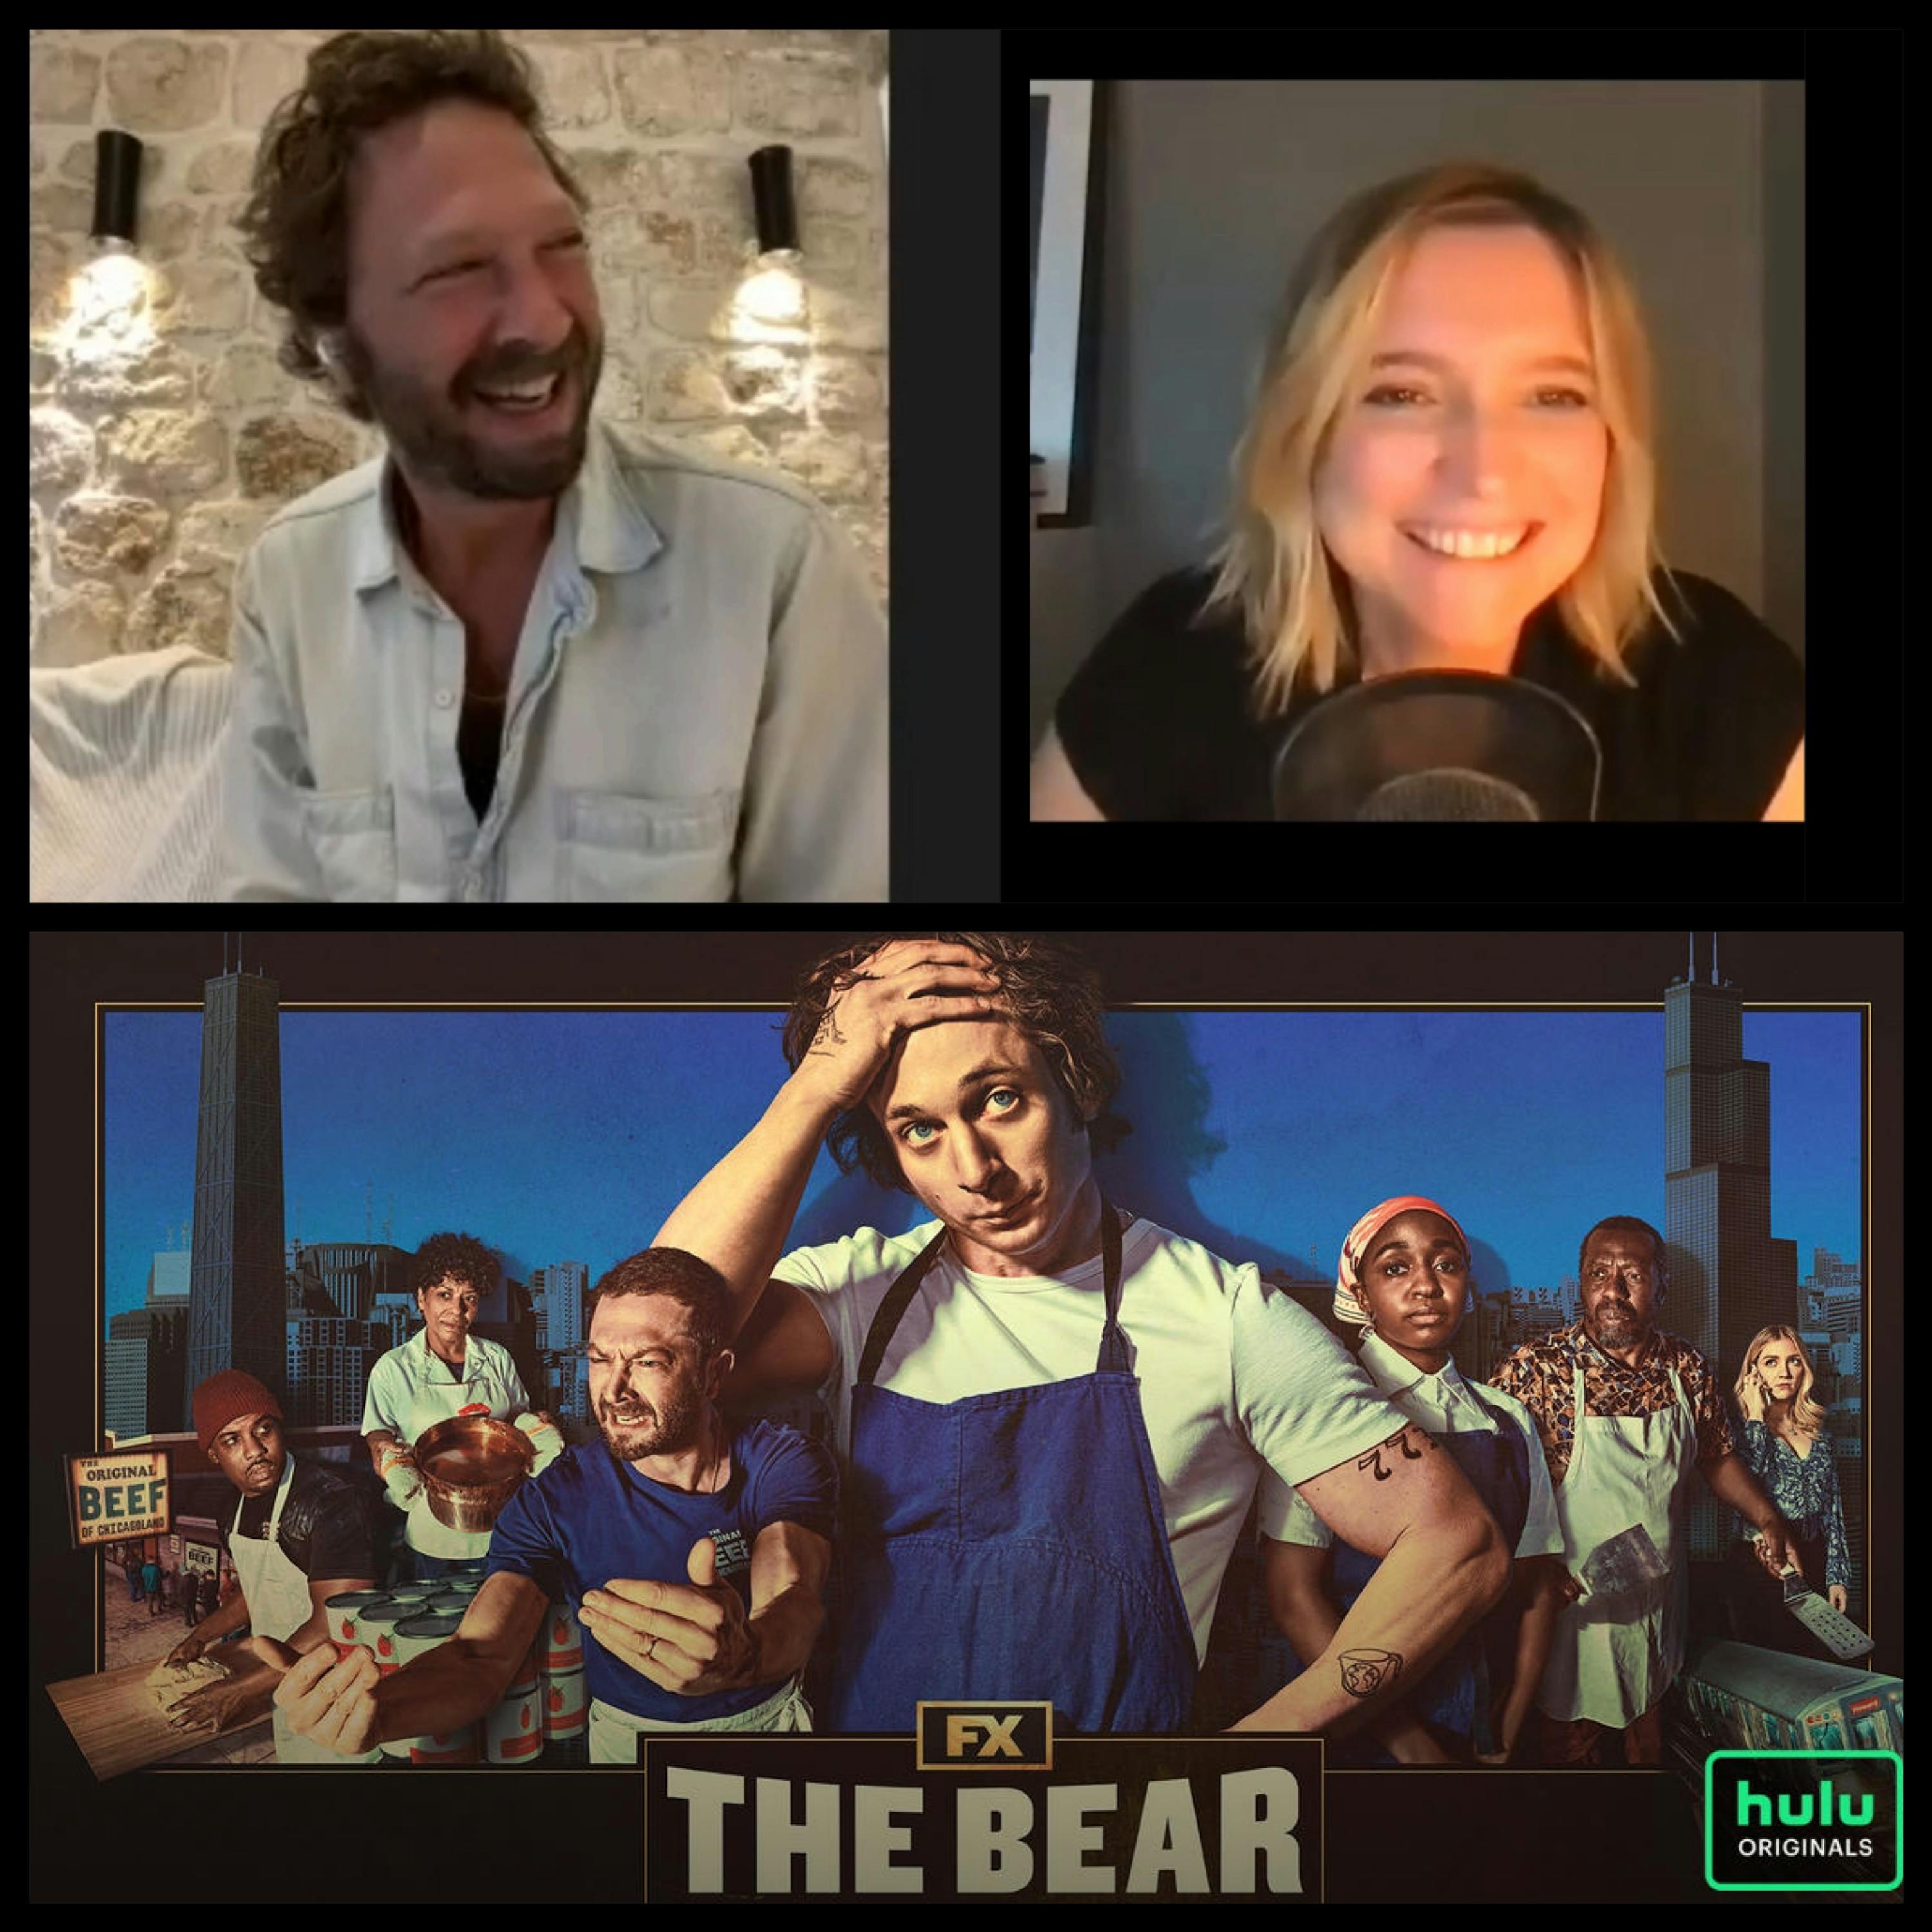 294: Actor Ebon Moss-Bachrach on "The Bear',  his incredible performance as Richie, chaos, love & found family.